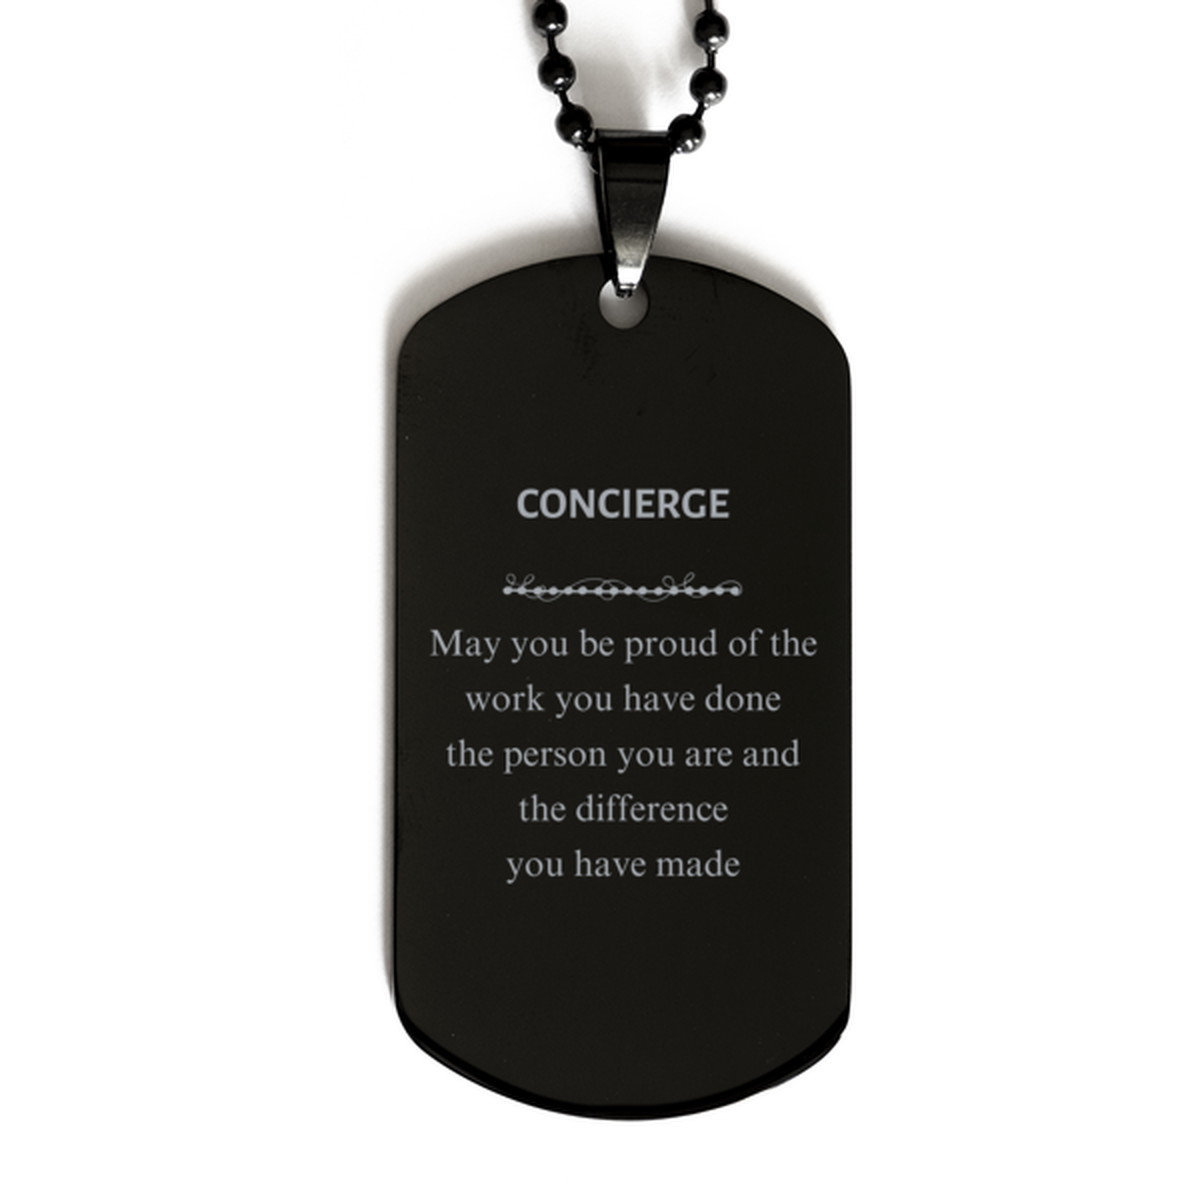 Concierge May you be proud of the work you have done, Retirement Concierge Black Dog Tag for Colleague Appreciation Gifts Amazing for Concierge